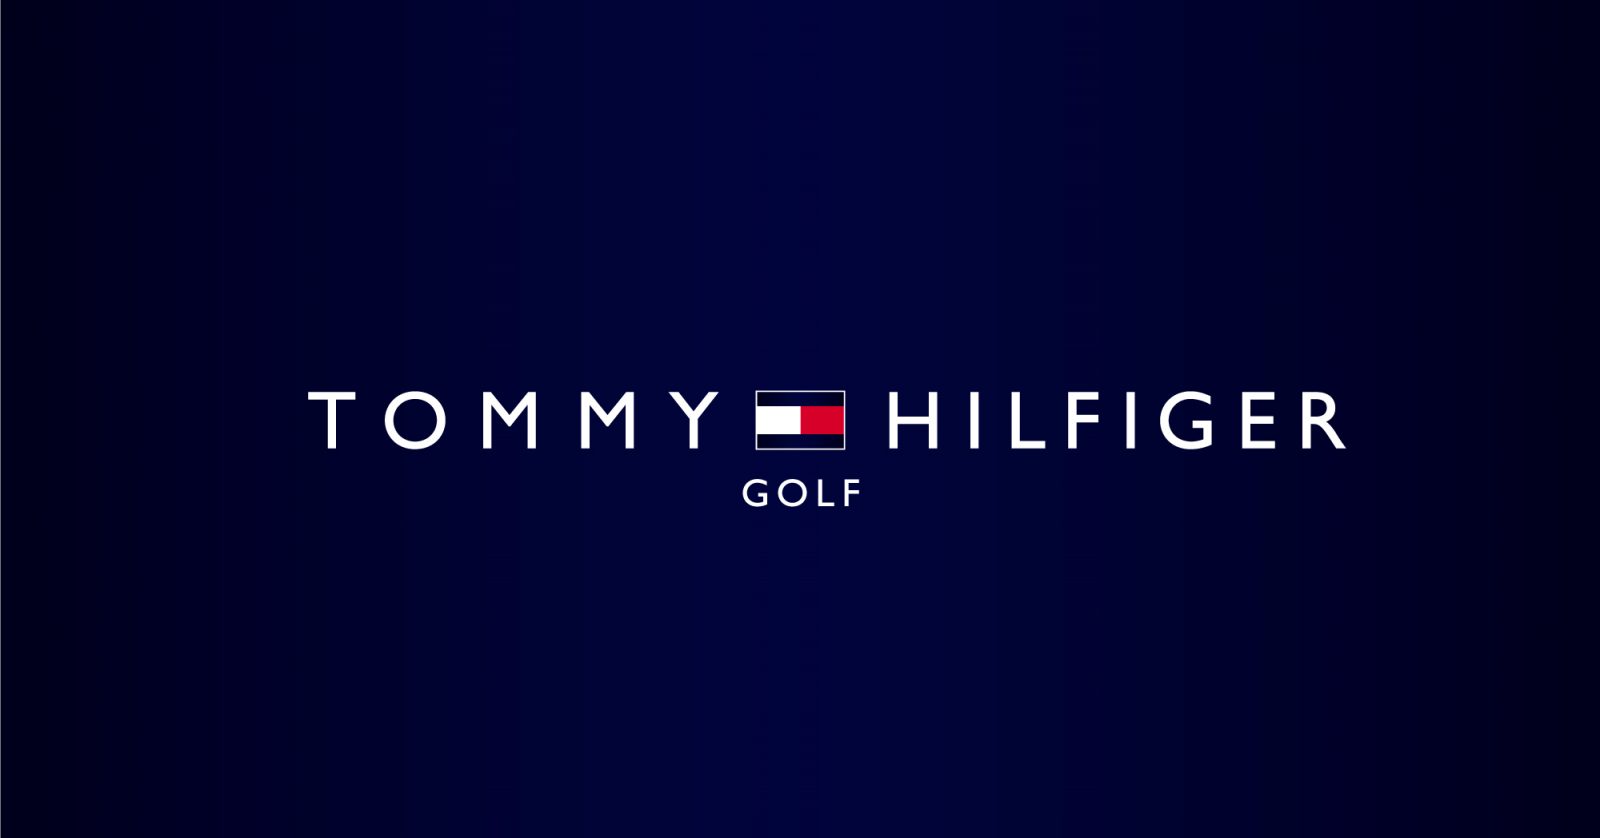 tommy hilfiger offers